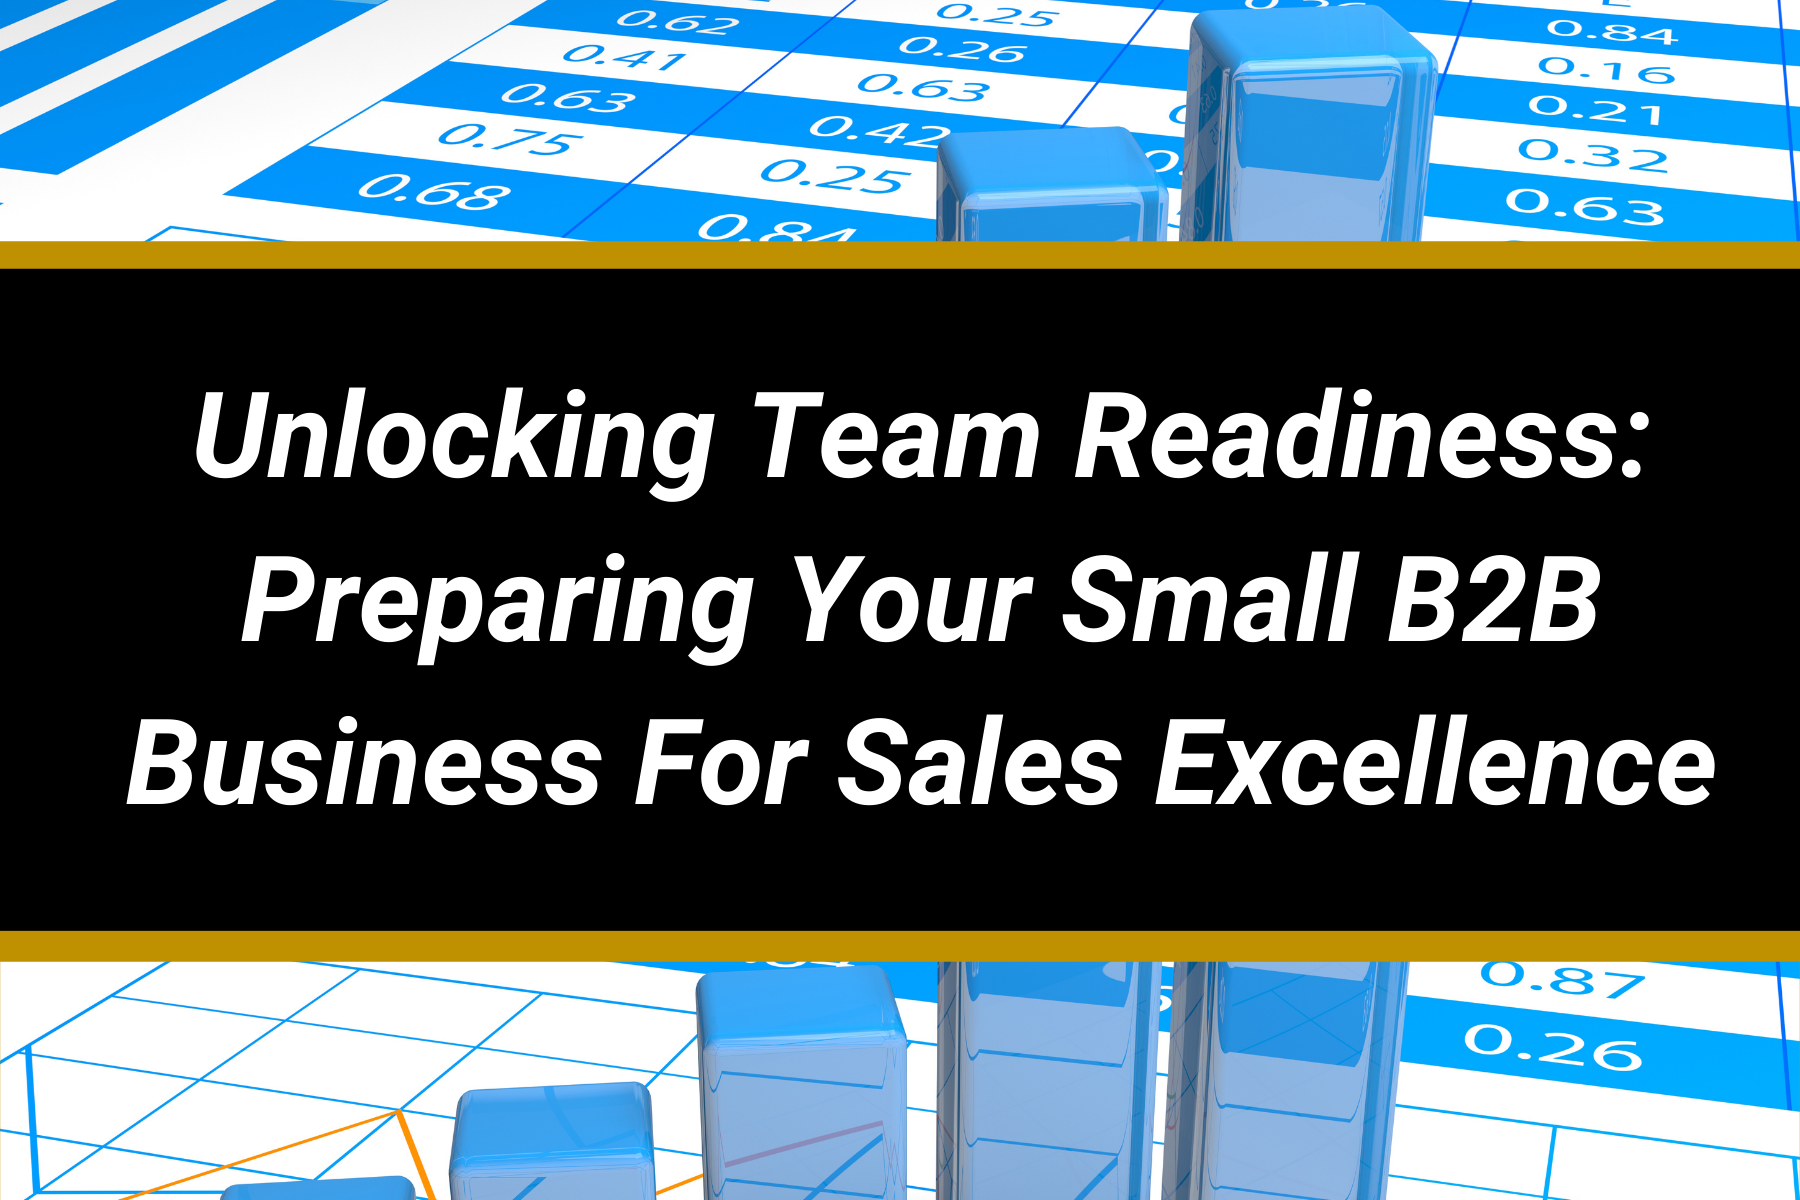 Unlocking Team Readiness: Preparing Your Small B2B Business For Sales Excellence